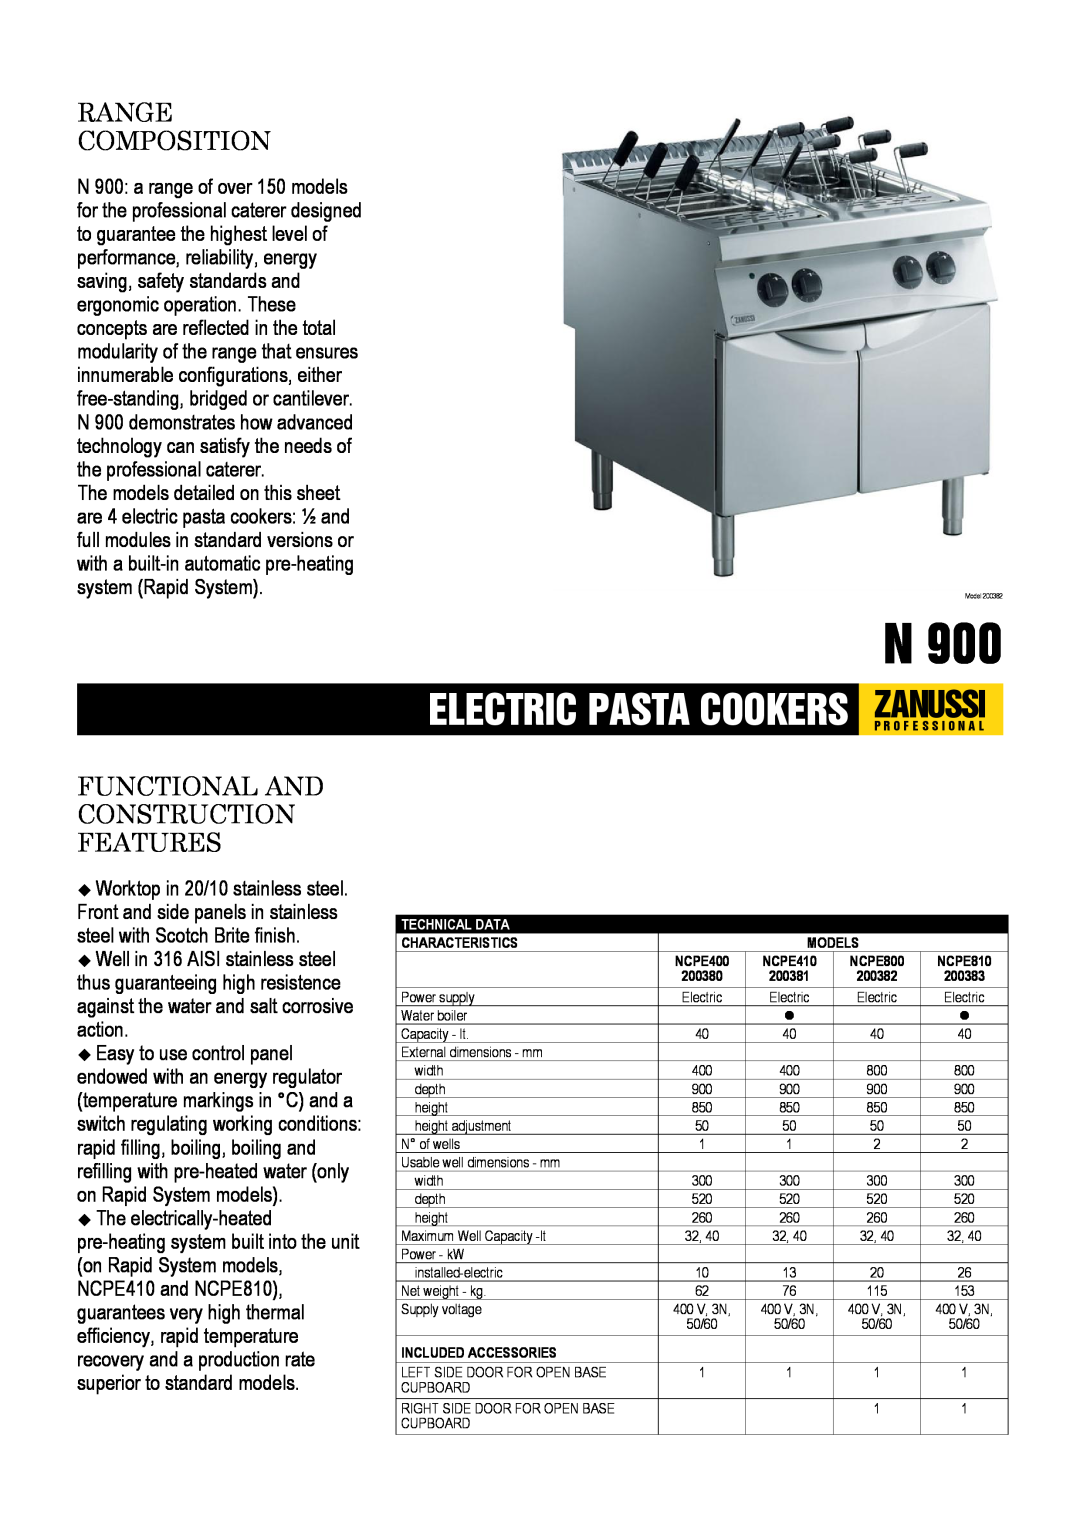 Zanussi NCPE410, NCPE810, NCPE800, NCPE400, 200380, 200383 dimensions Range Composition, Functional And Construction Features 